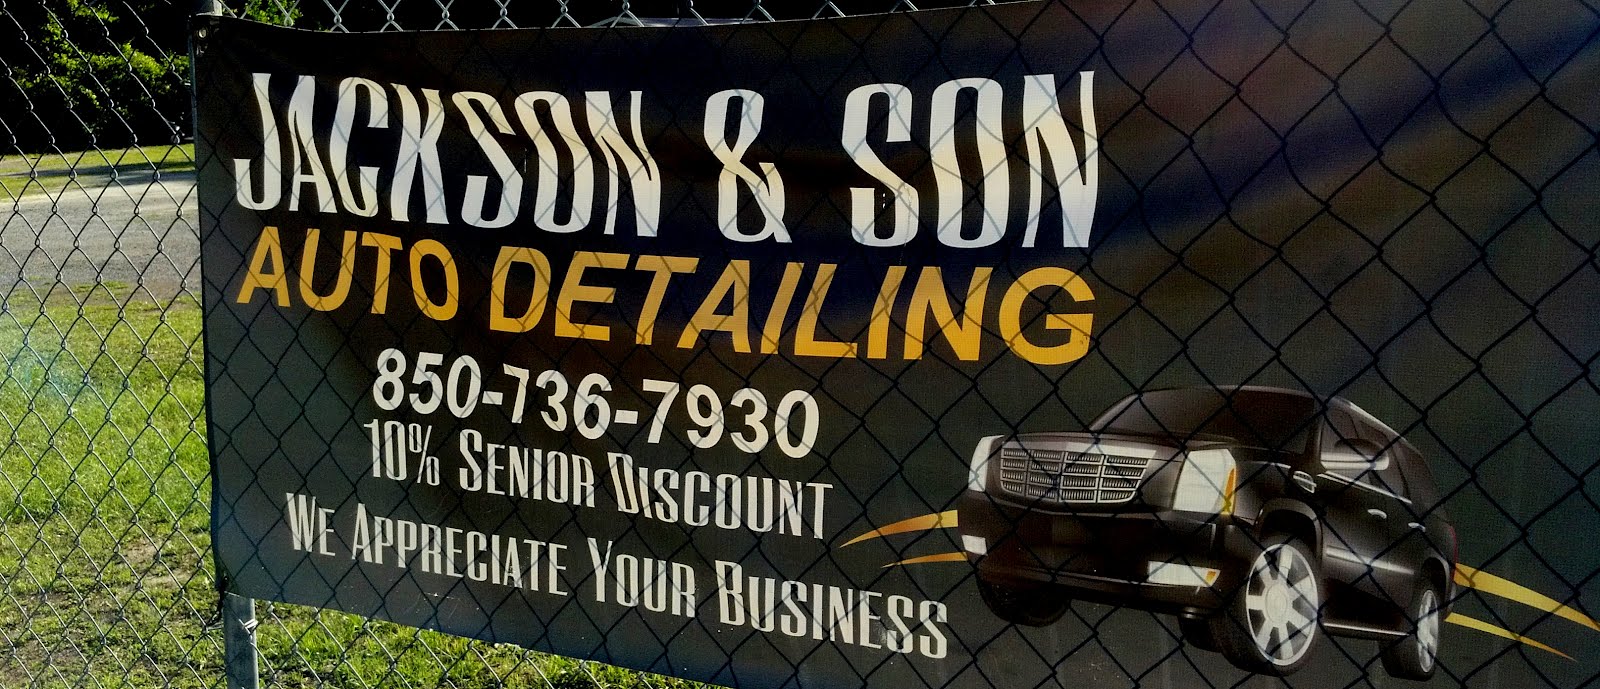 Jackson and Son Auto Detailing